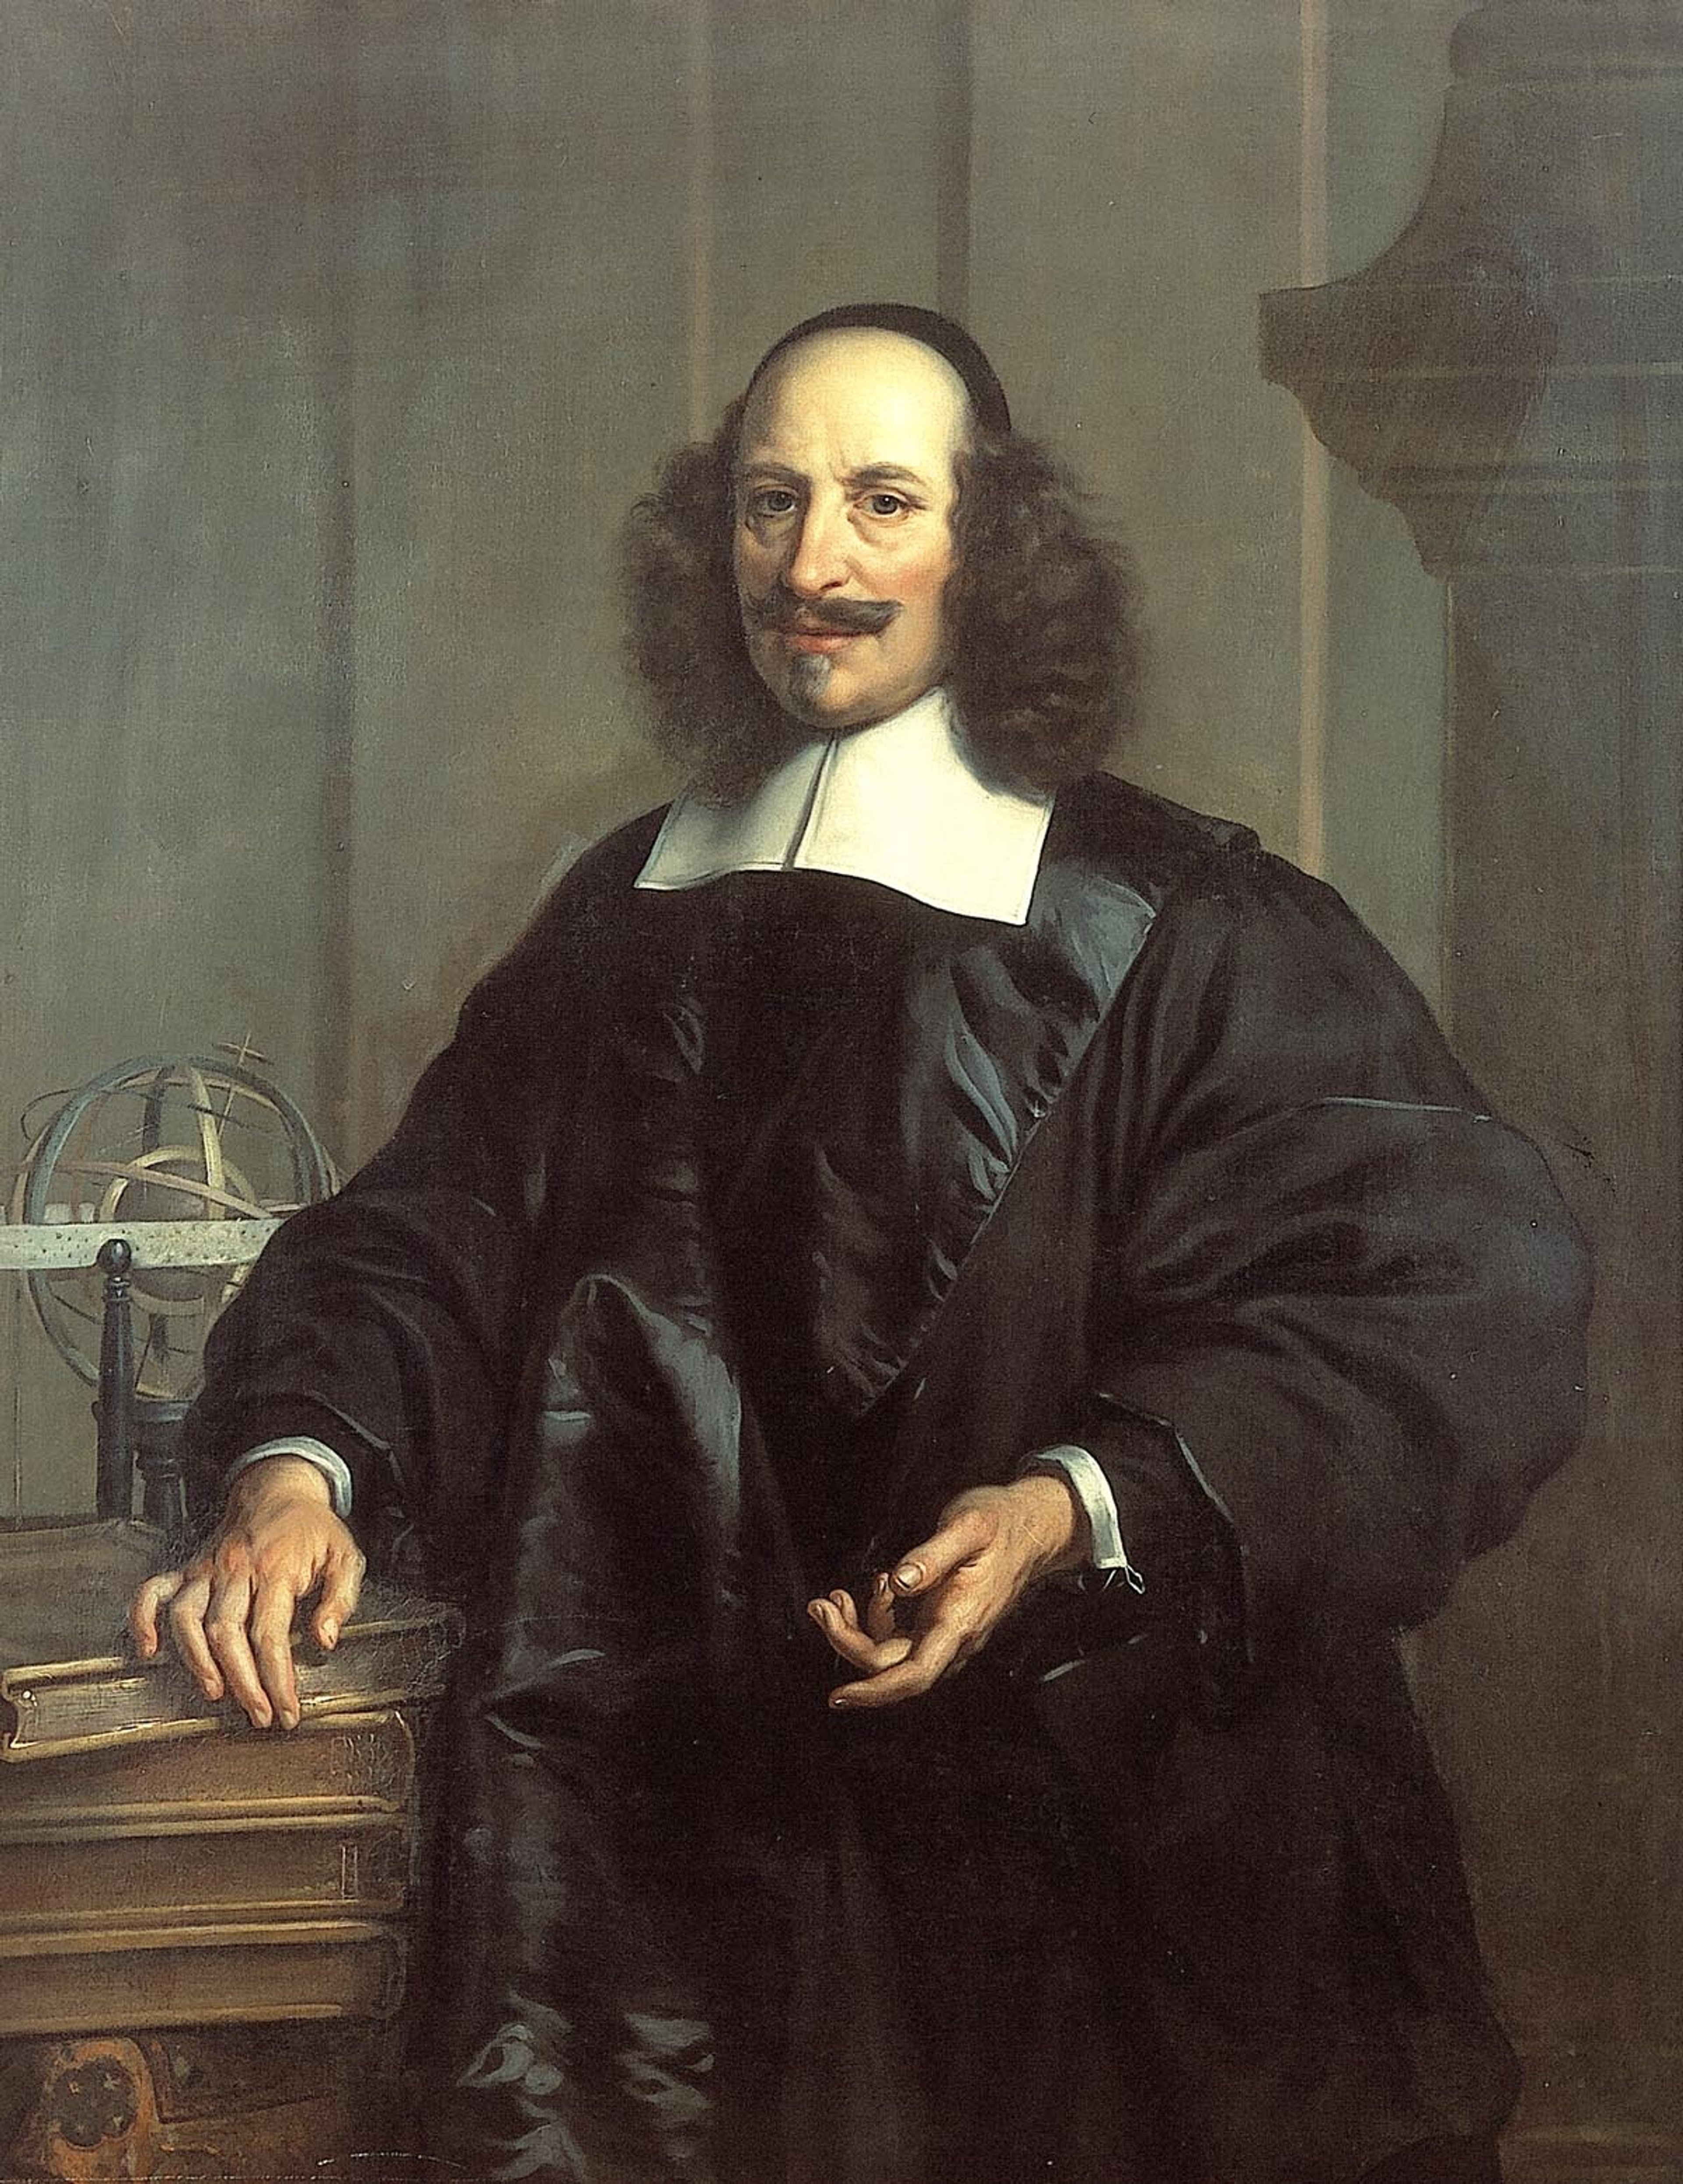 An oil painting of a man in black robes with a square, white colour leaning on a wooden desk.